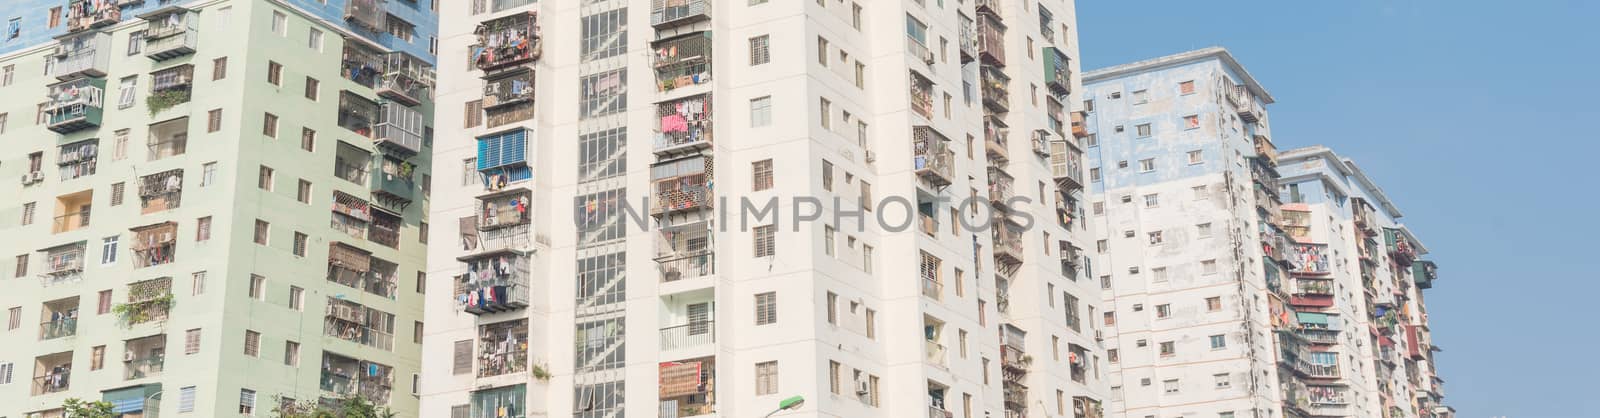 Panorama view typical high-rise apartment complex in Hanoi, Vietnam with hanging clothes over balcony